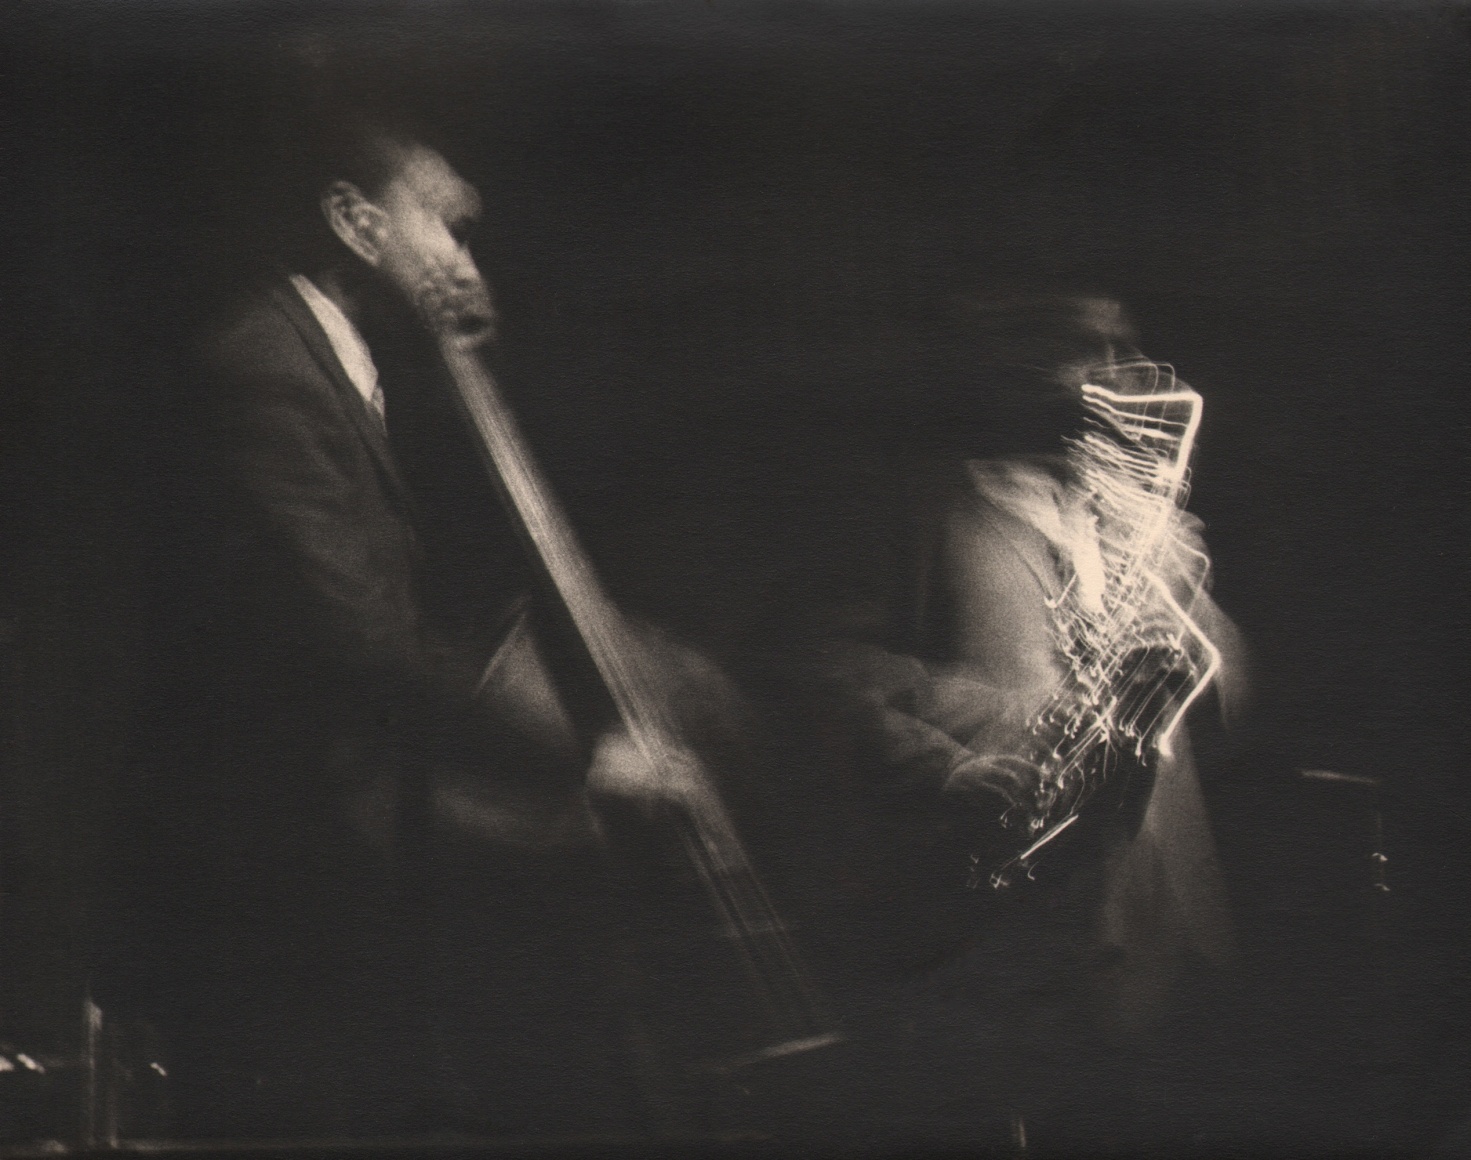 38. Beuford Smith, Paul Chambers, John Coltrane, ​c. 1970. Dark exposure of two figures blurred with motion, playing instruments.